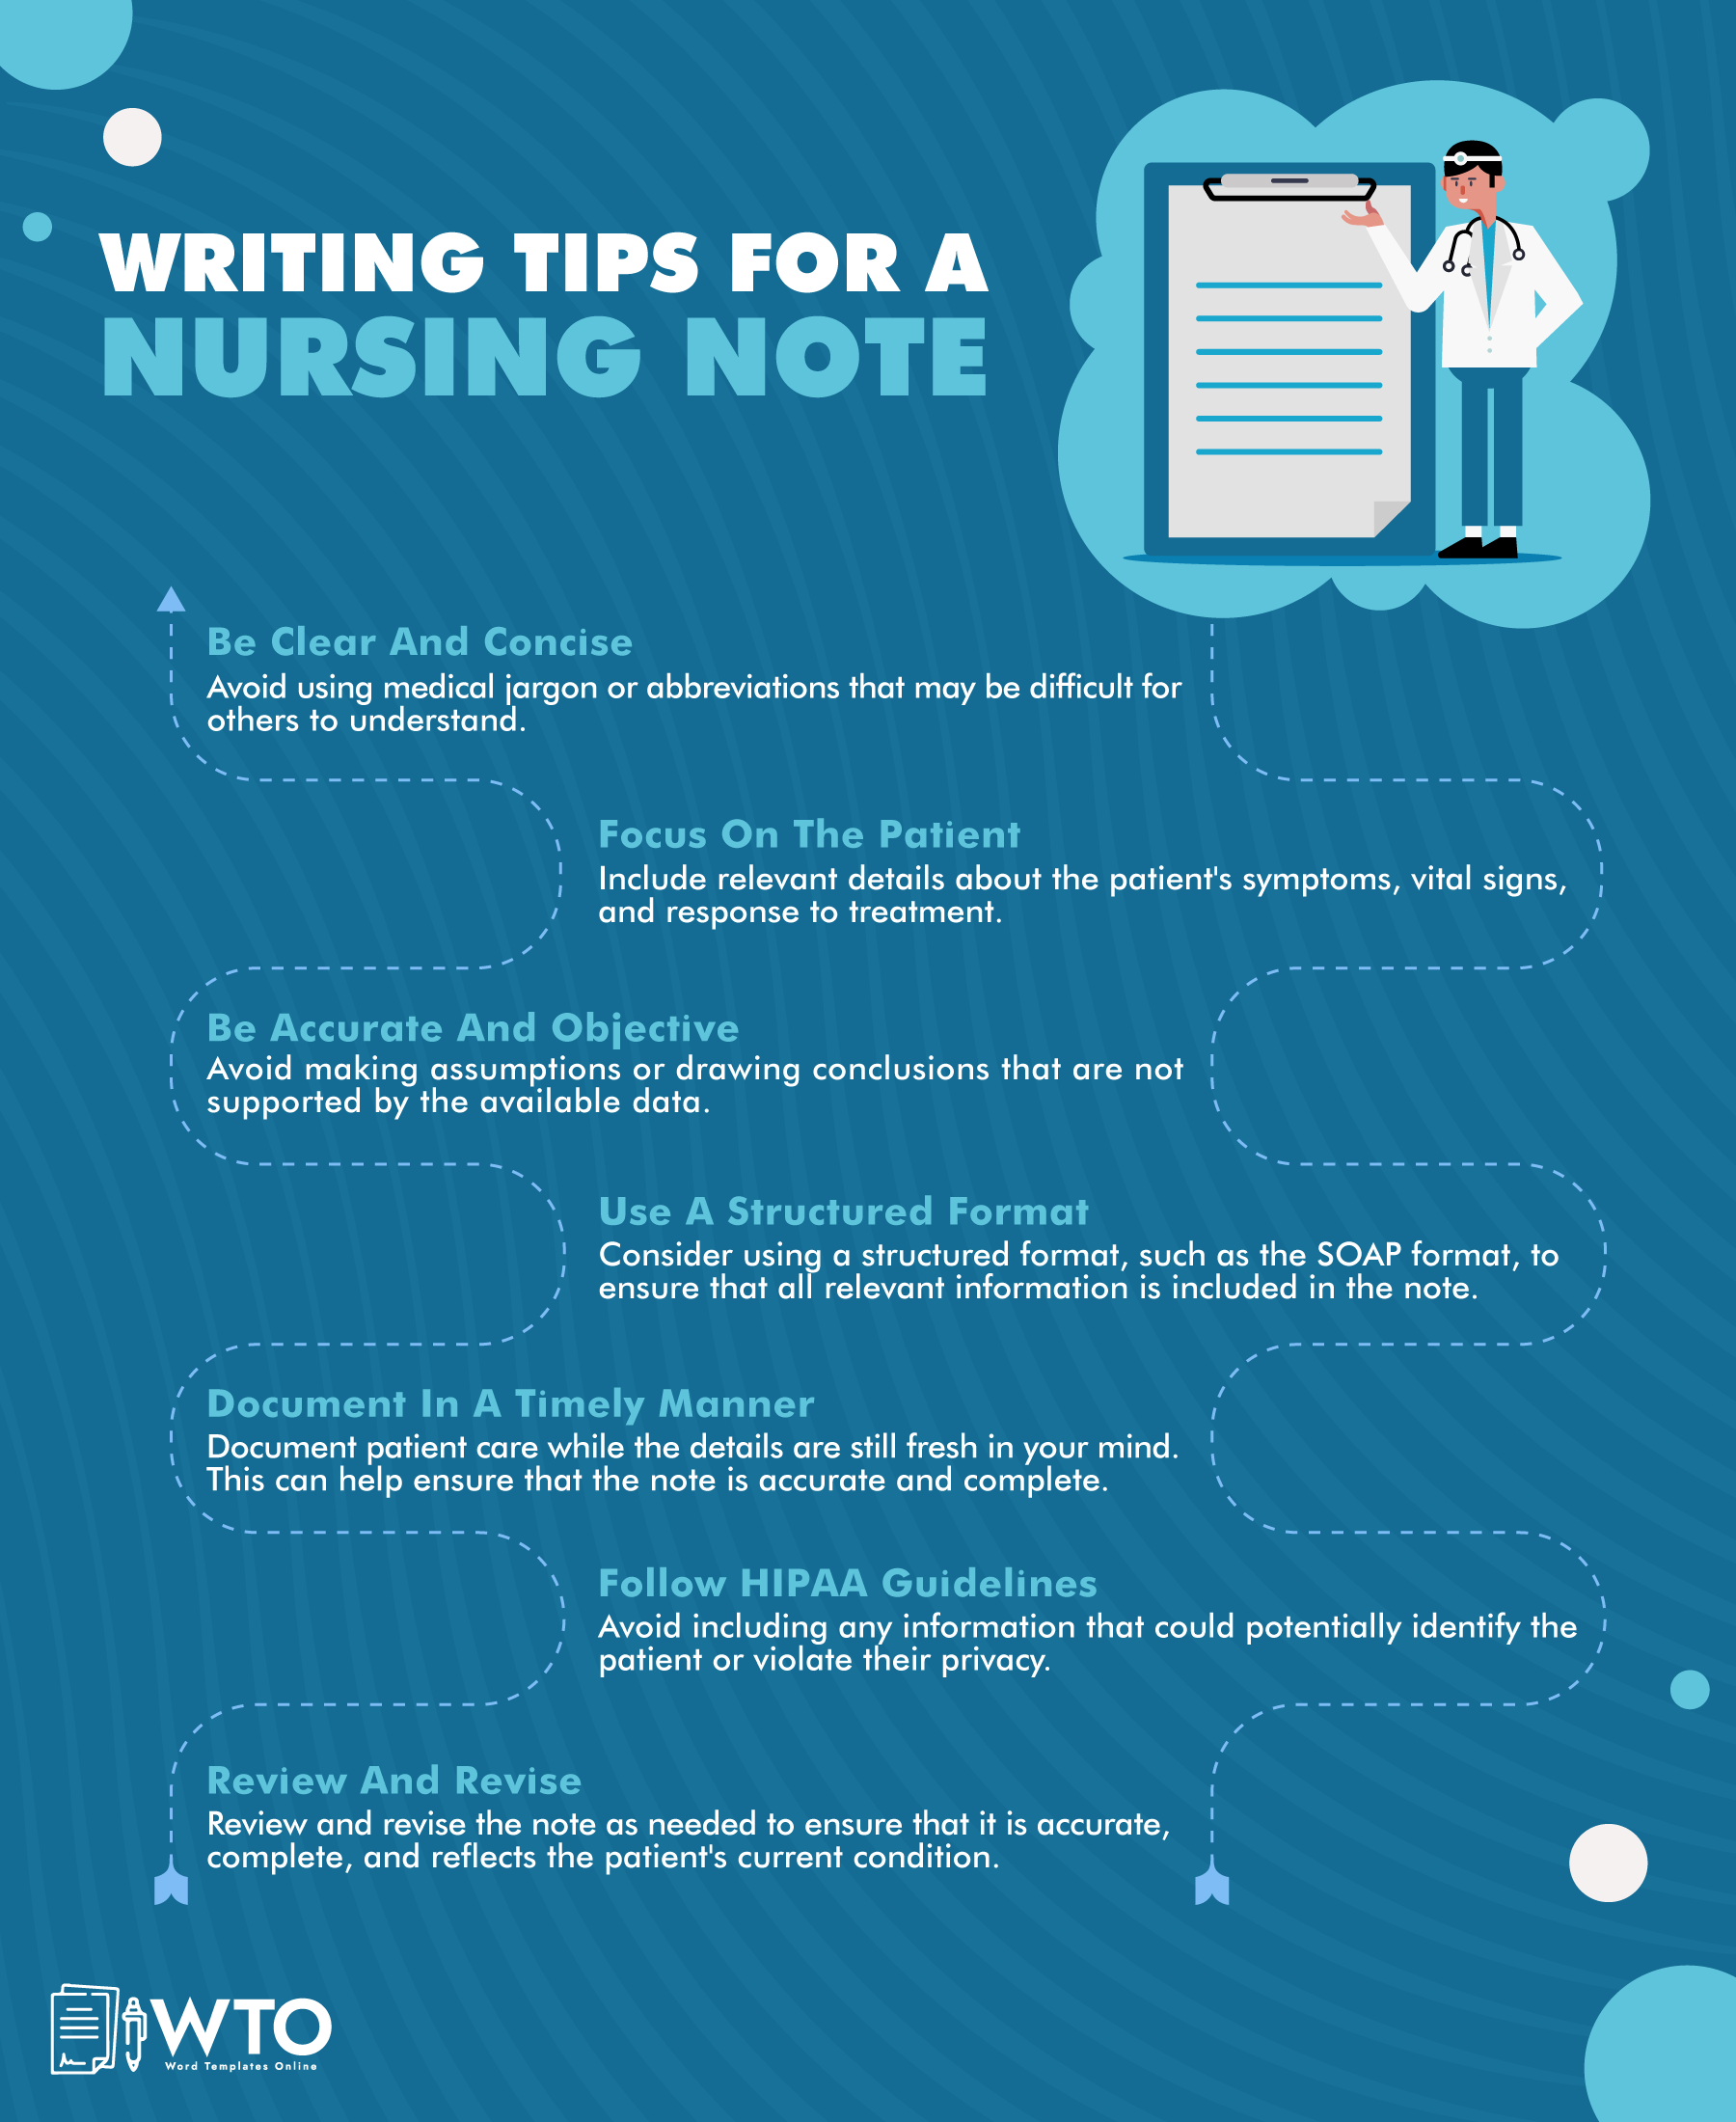 This infographic is about nursing note writing tips.